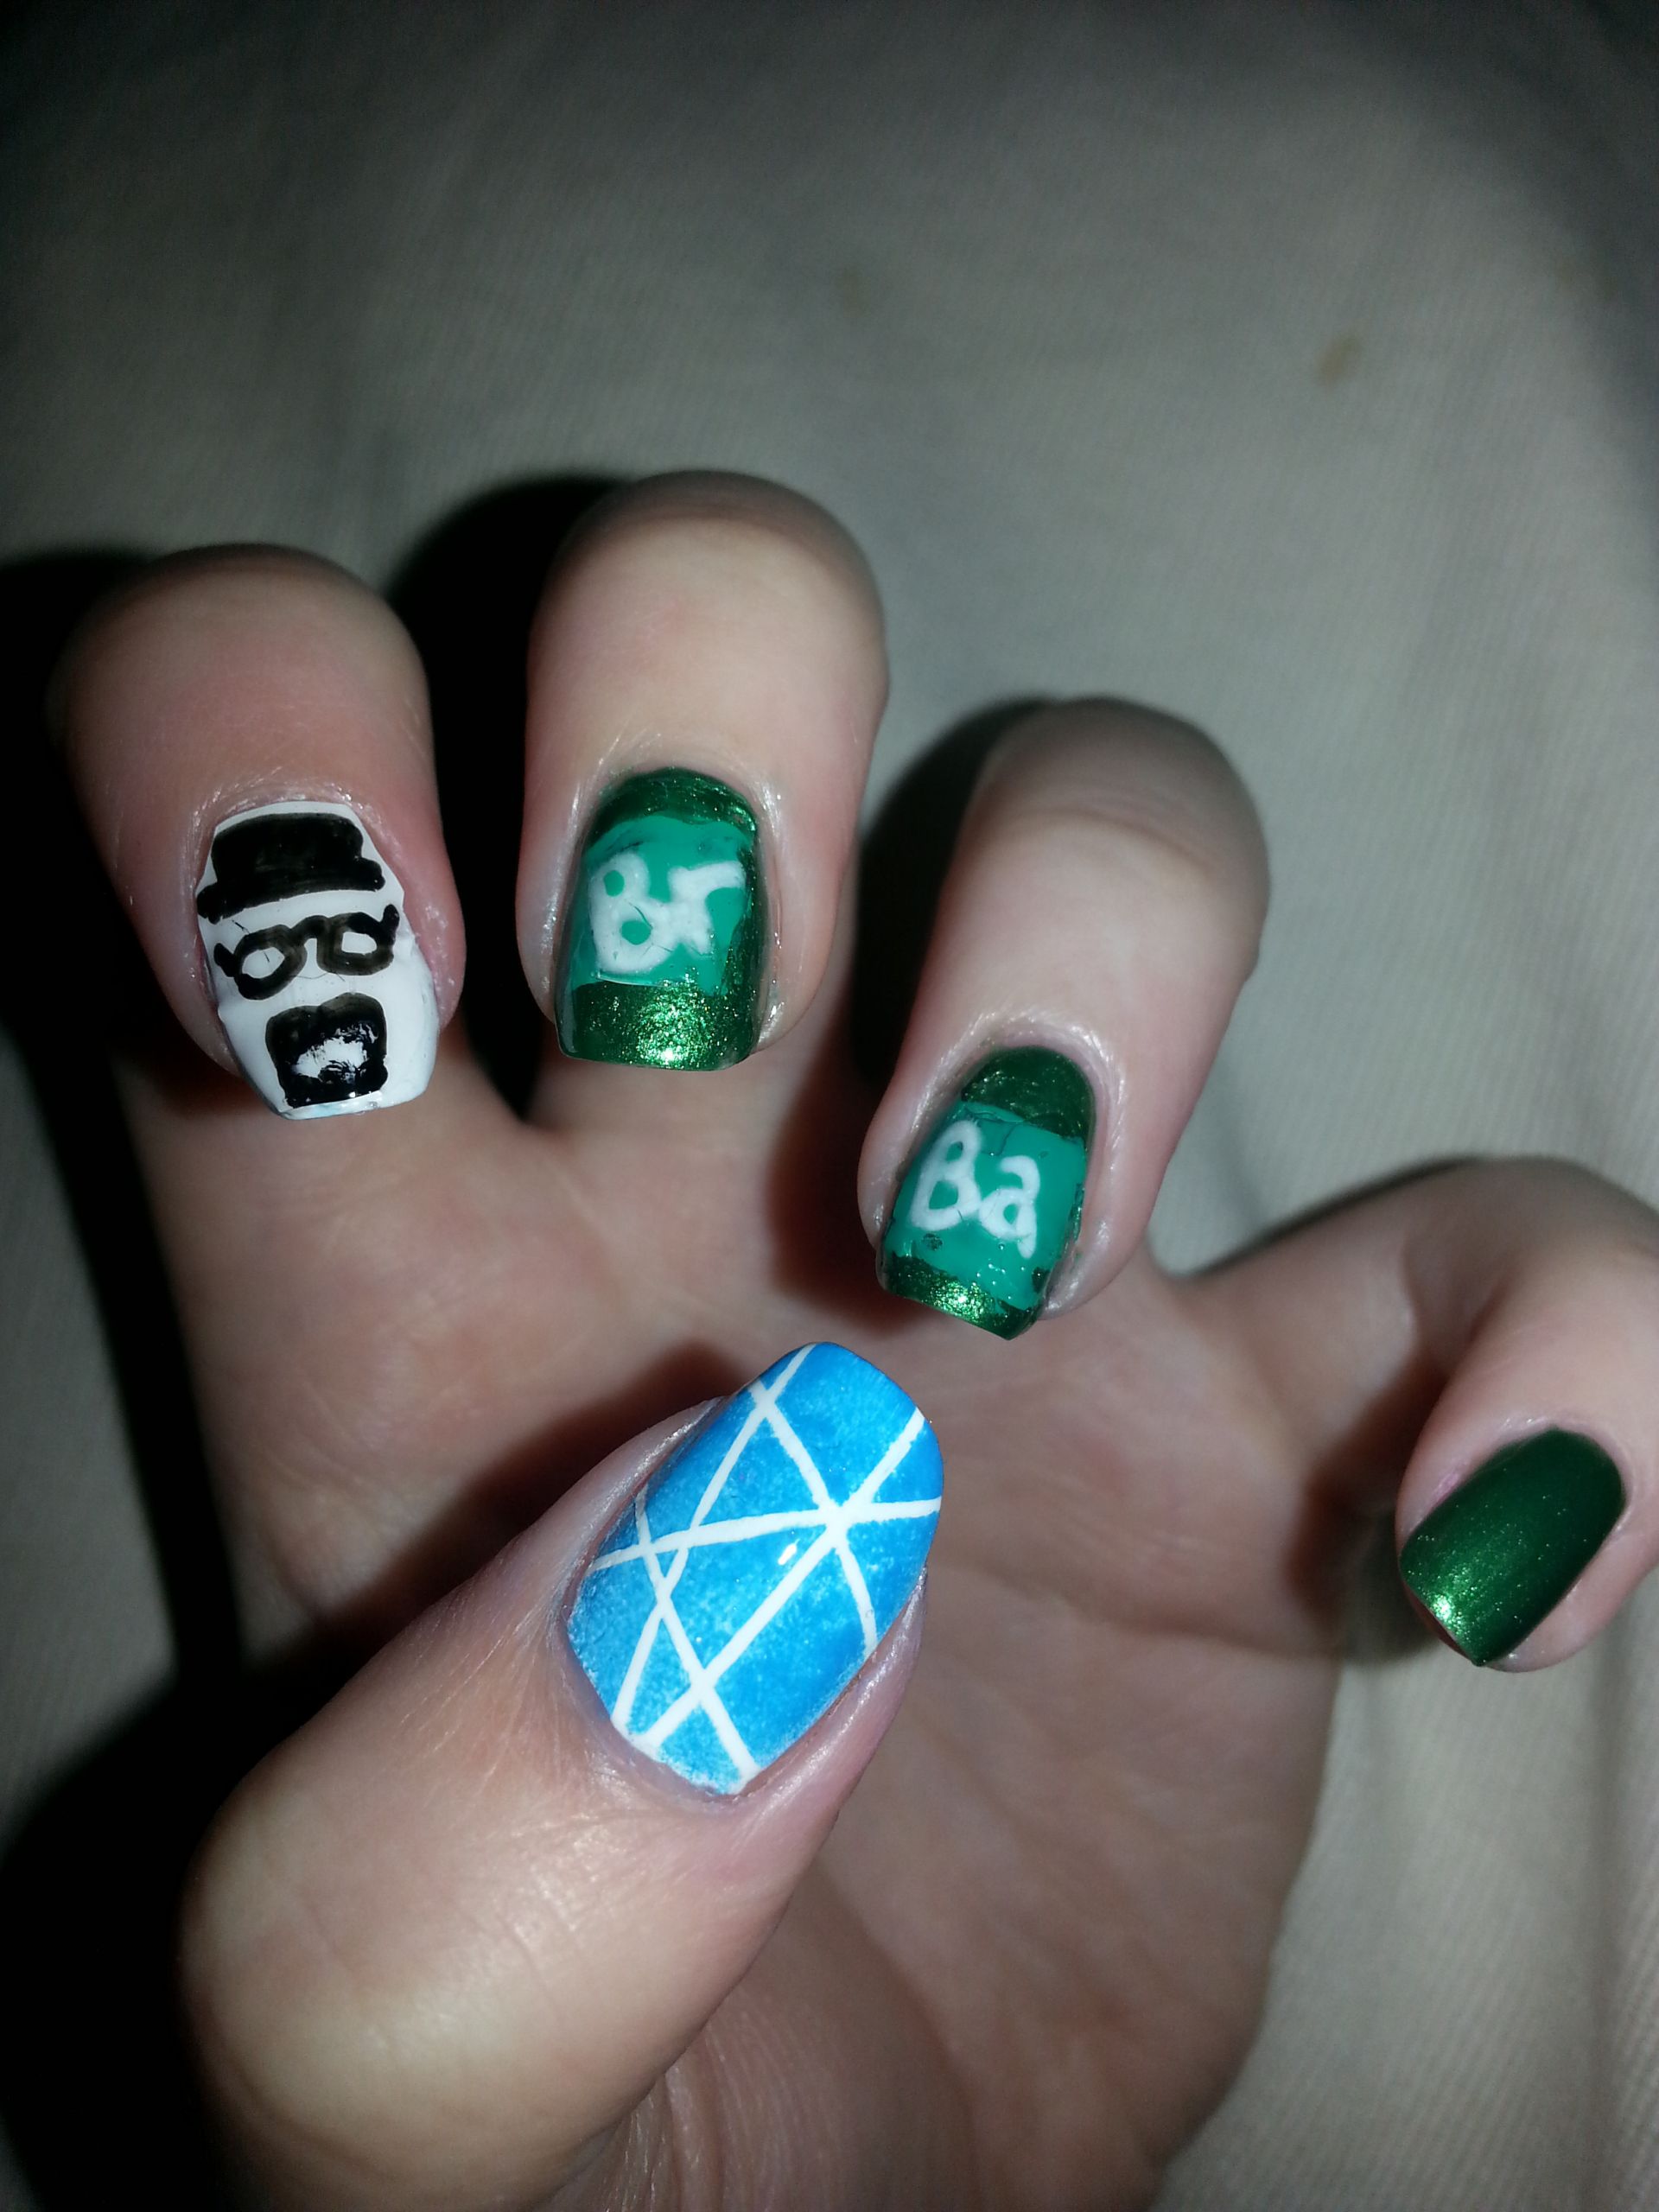 Bad Nail Art
 FingerFood’s Theme Buffet – Breaking Bad Nails